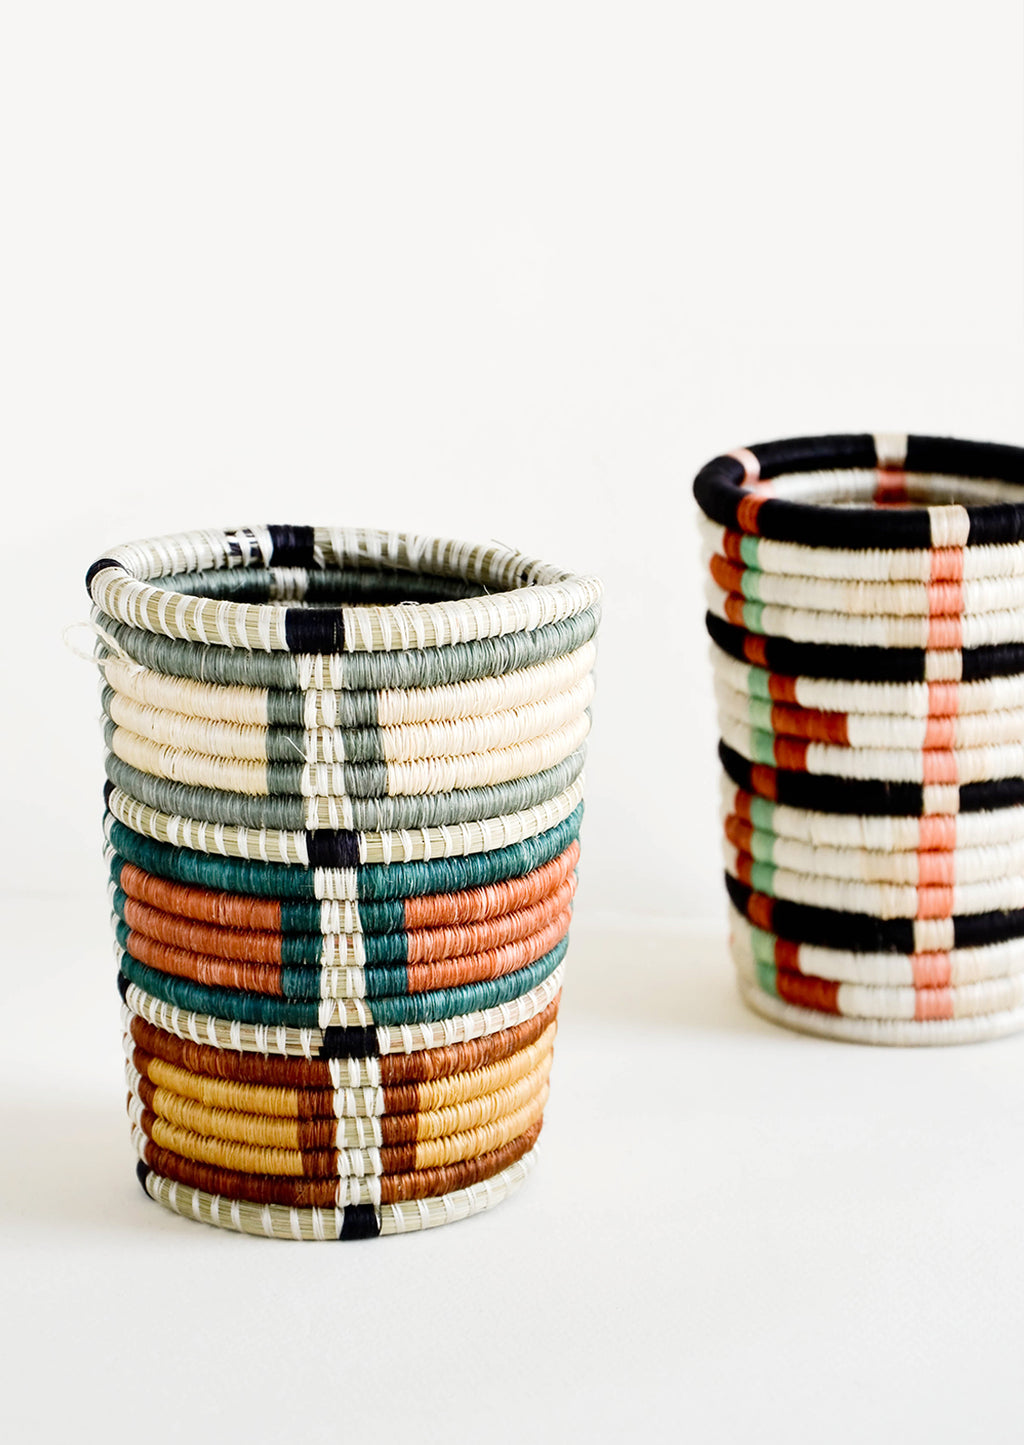 3: Pencil cup shaped baskets woven from multicolor sweetgrass.